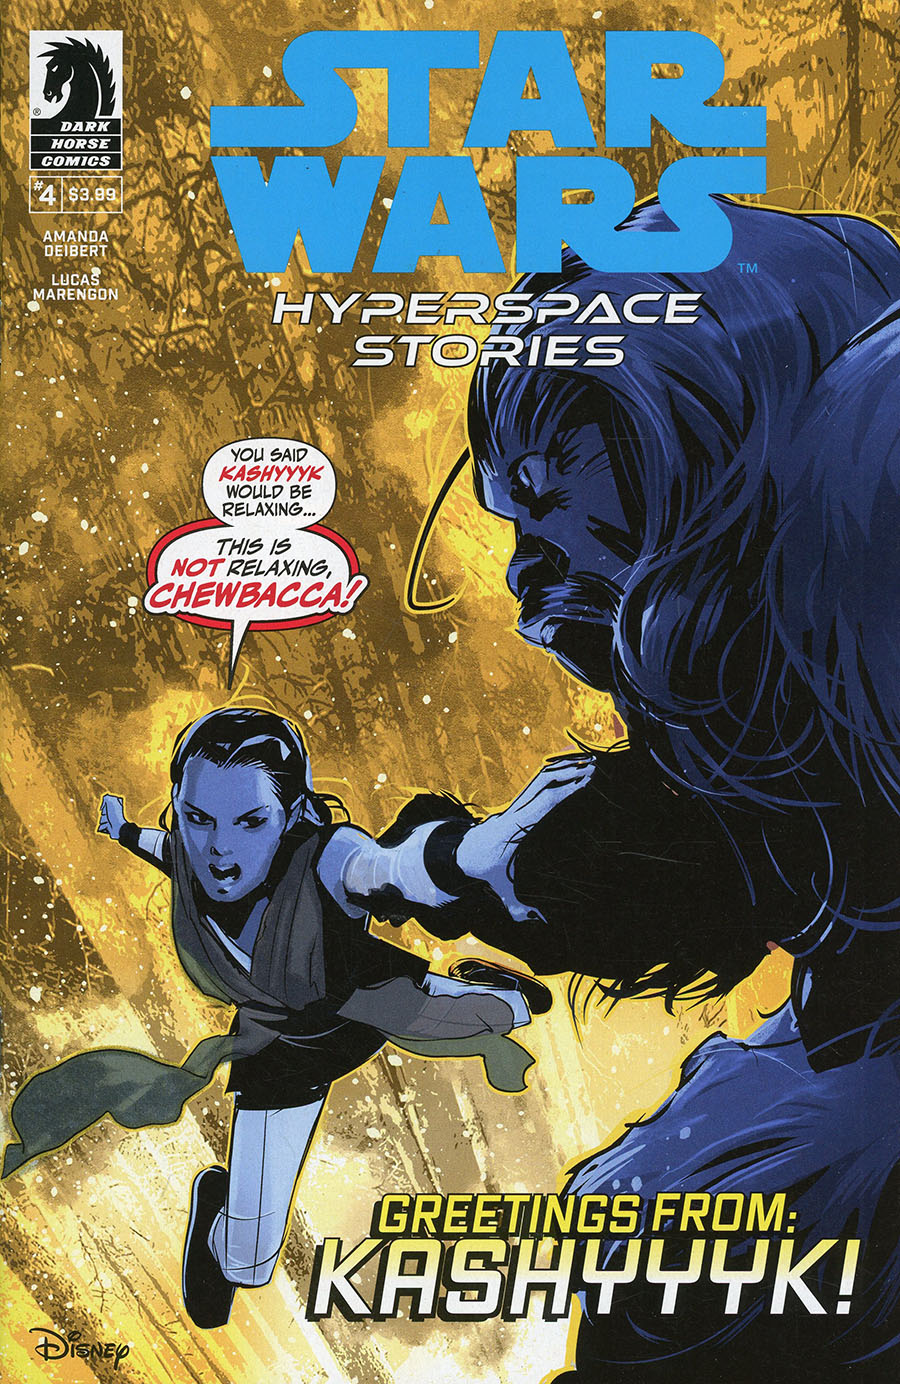 Hyperspace Stories #4 (Cover B by Cary Nord) (01.03.2023)